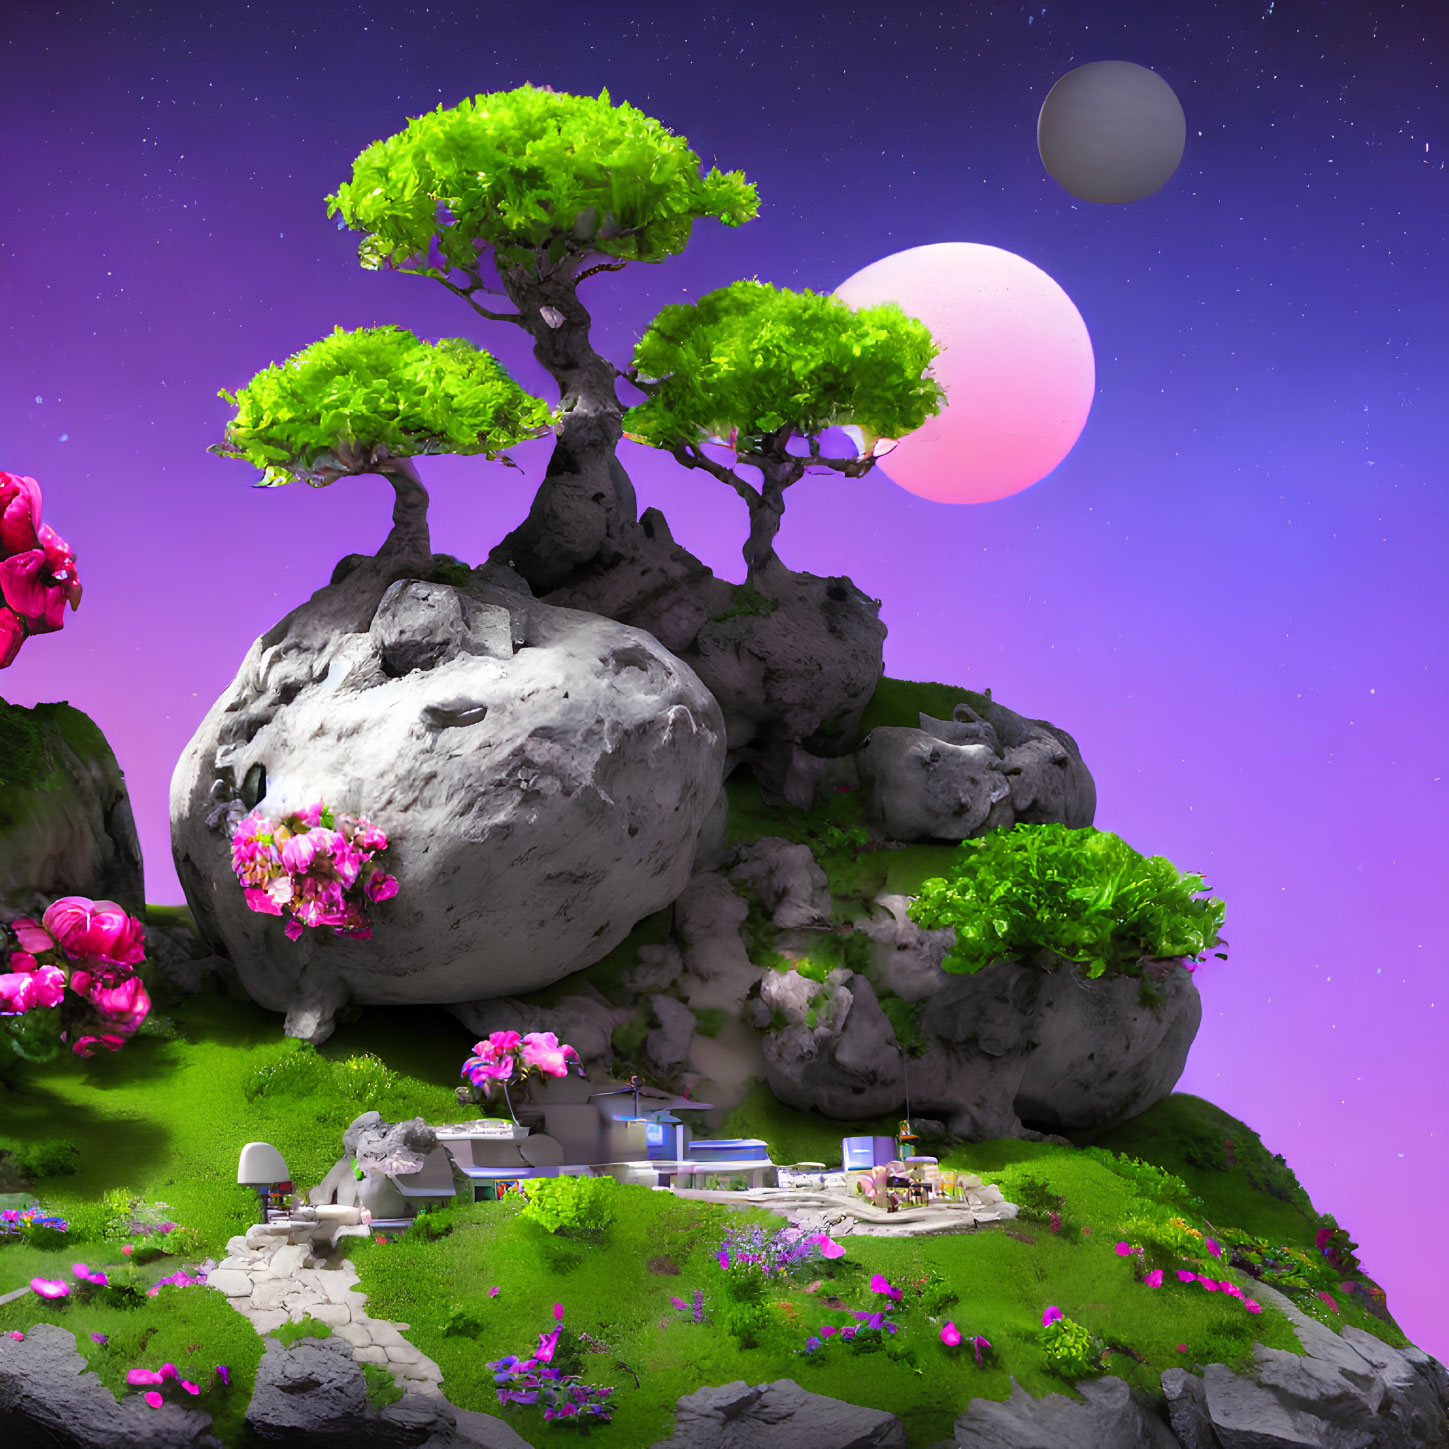 Fantasy landscape with floating rock, modern house, and two moons